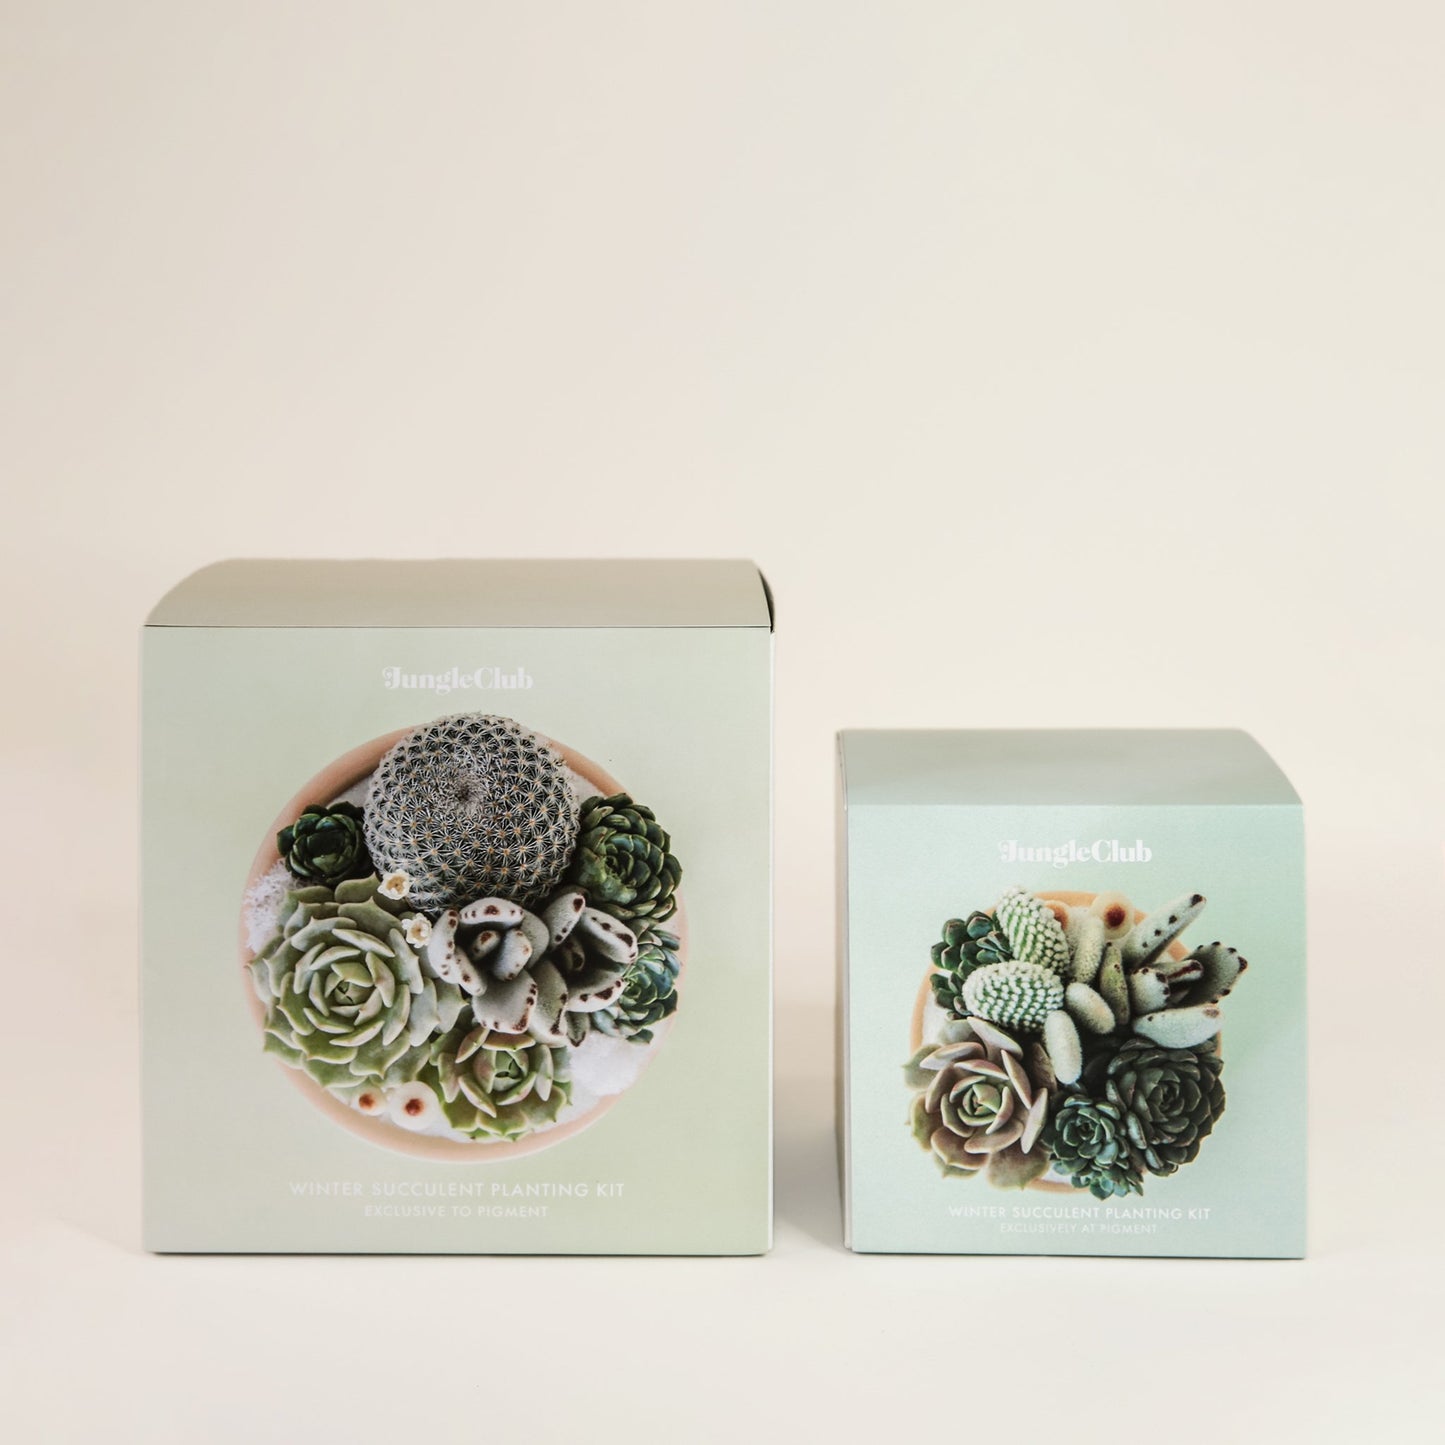 Two boxed planting kits. The box to the left is the larger of the two and has pastel pink packaging. The box to the right is smaller in a light blue color. Each box features images of potted succulent arrangements. The boxes read 'Jungle club, spring succulent planting kit' in small white lettering. 